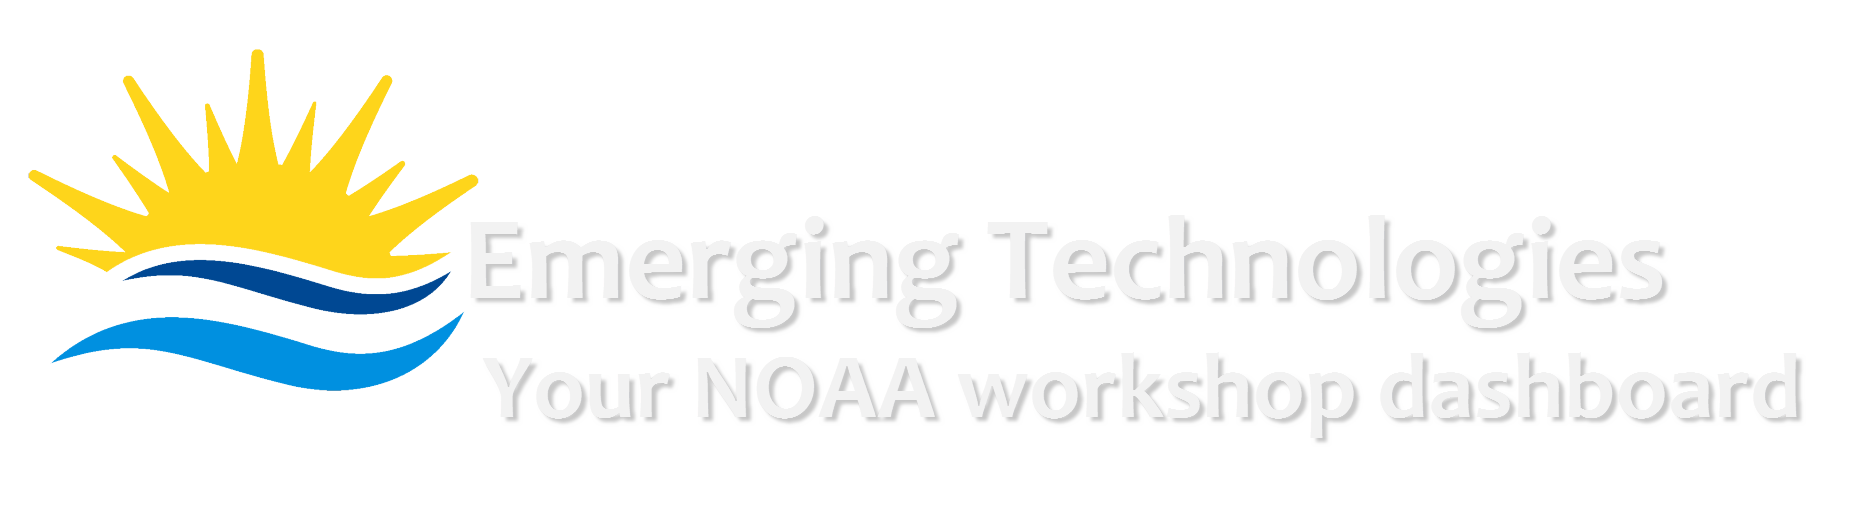 Emerging Technology Workshop emblem with rising sun and waves